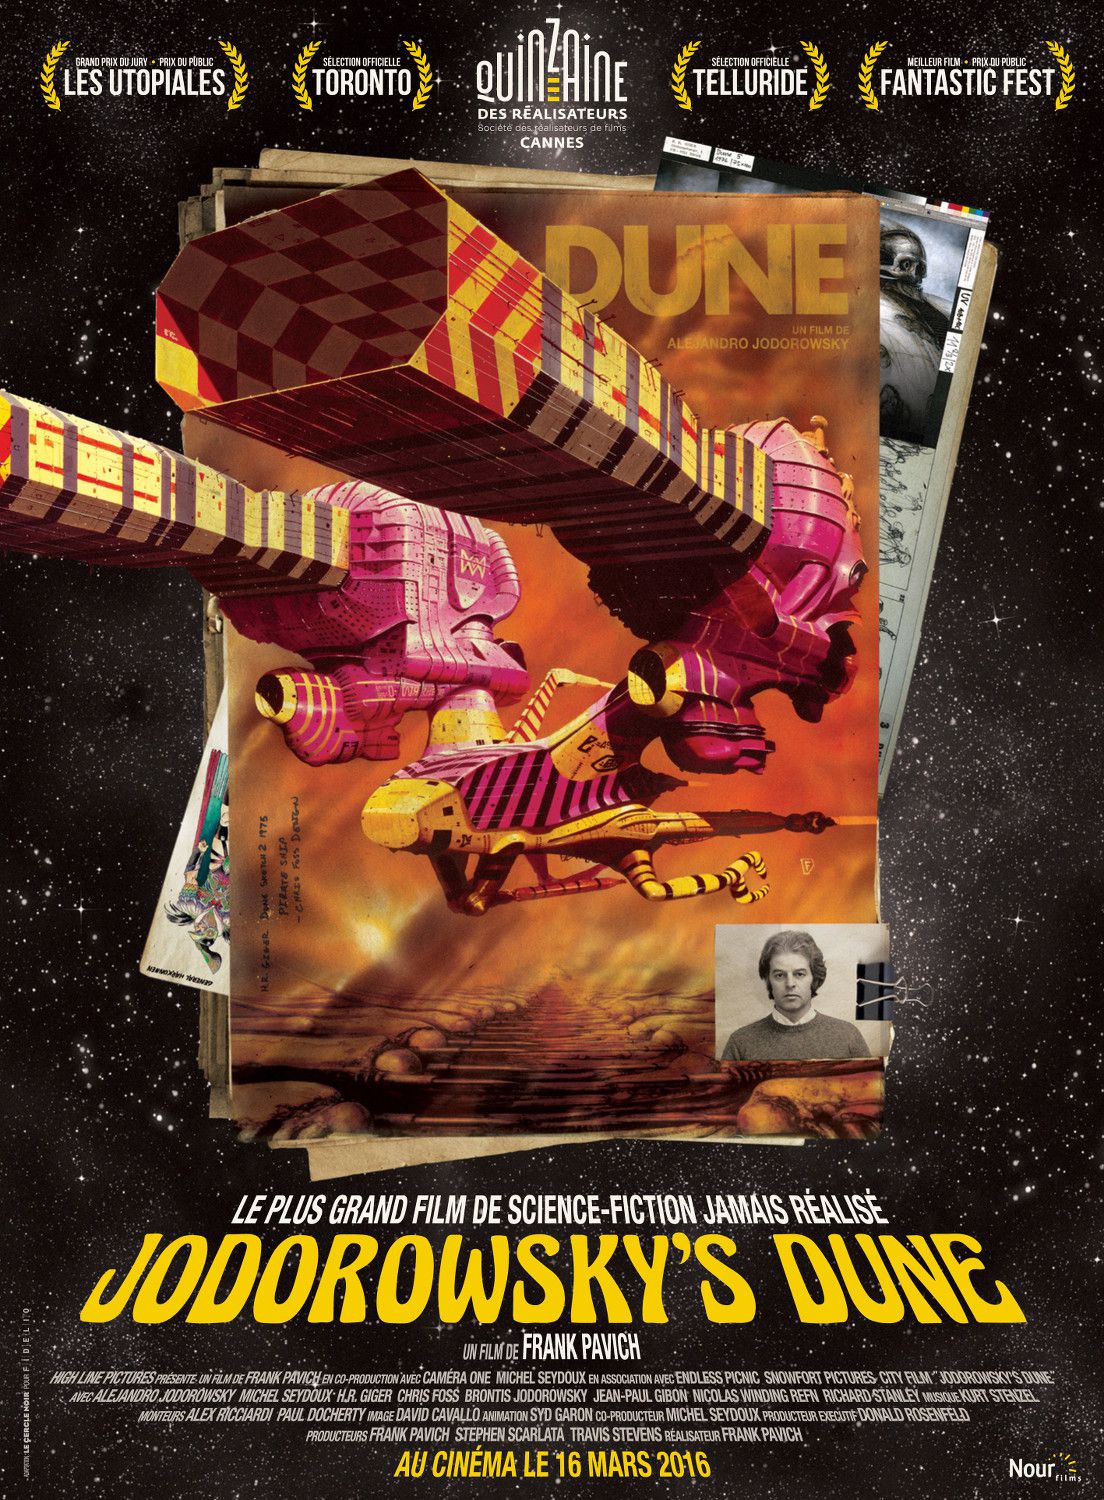 Jodorowsky's Dune - Documentaire (2013) streaming VF gratuit complet